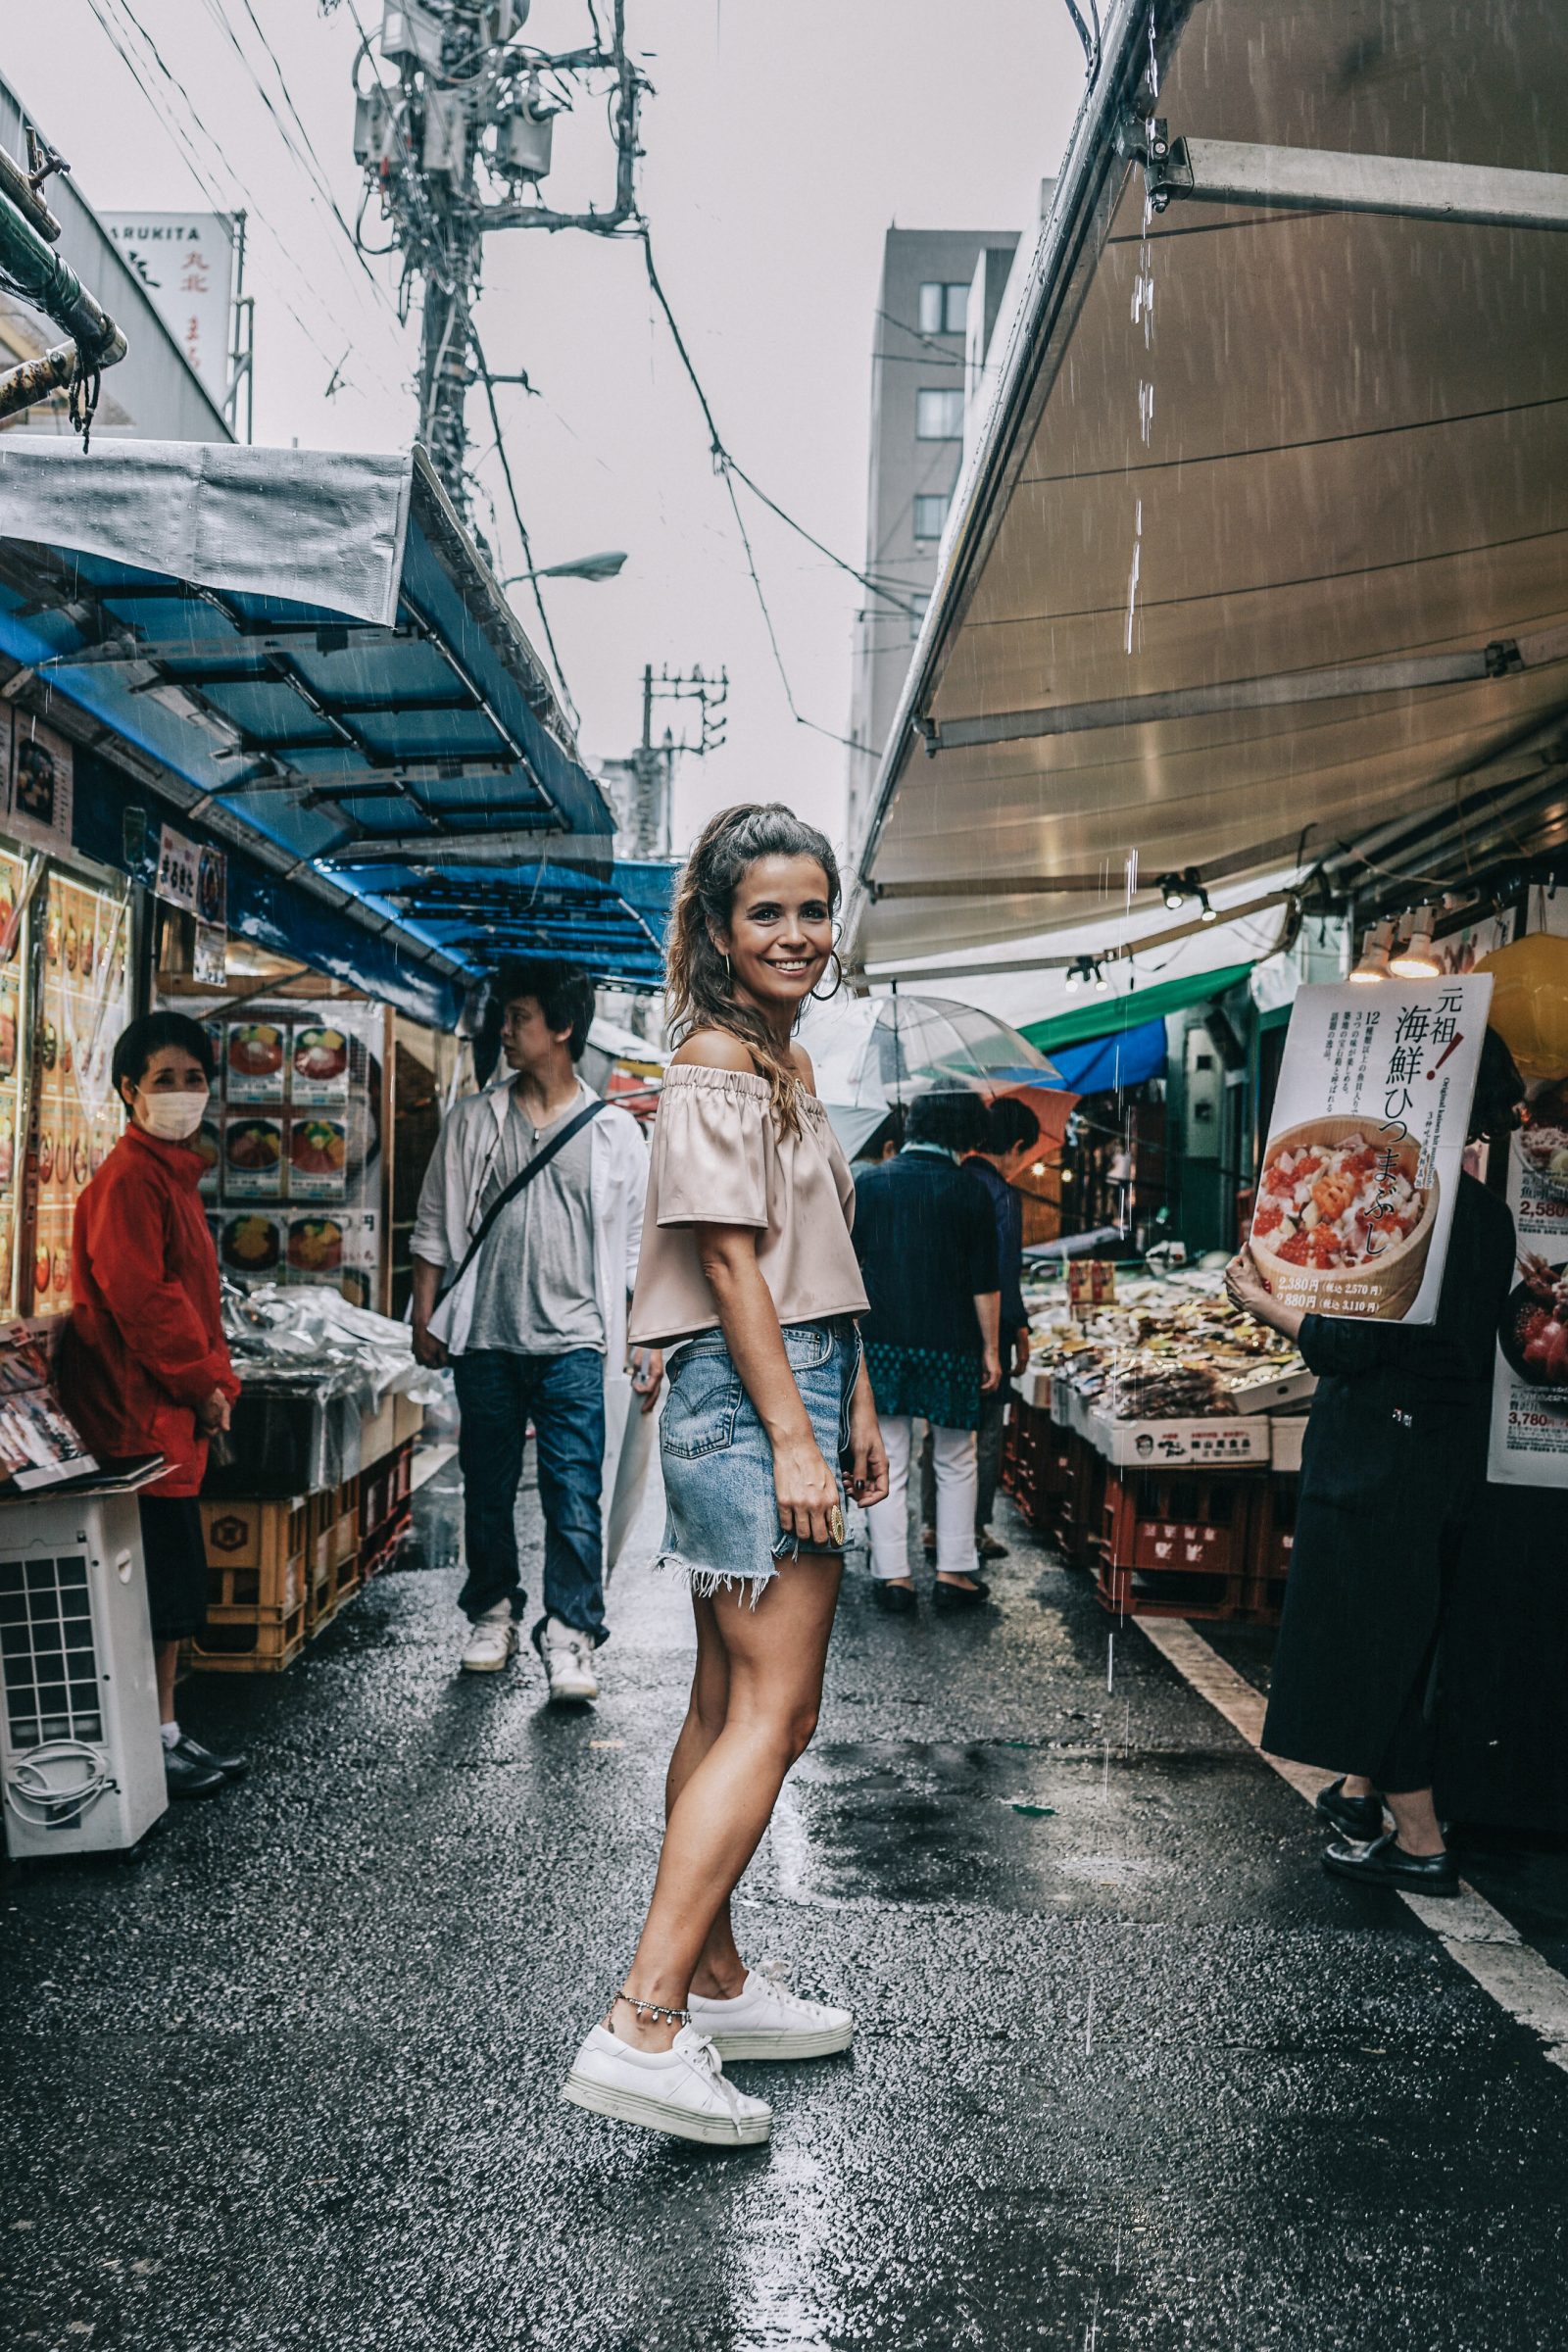 Tokyo_Travel_Guide-Fish_Market-Harajuku-Levis_Denim_Skirt-Off_The_Shoulders_Top-YSL_Sneakers-Outfit-Collage_Vintage-Street_Style-54